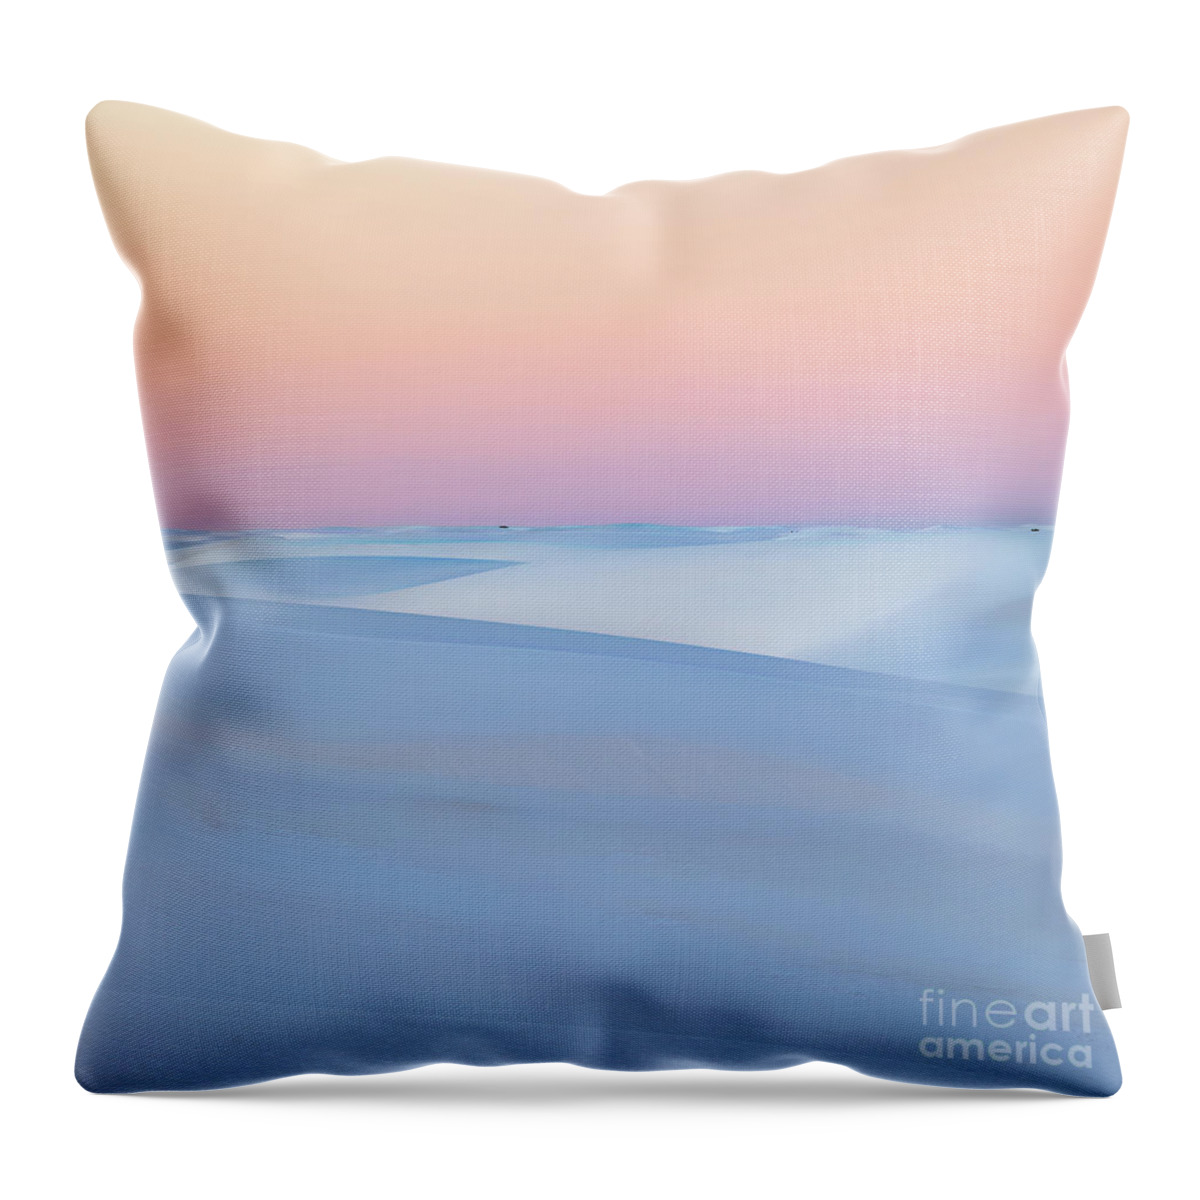 White Sands National Monument Throw Pillow featuring the photograph Tangerine Sands by Doug Sturgess